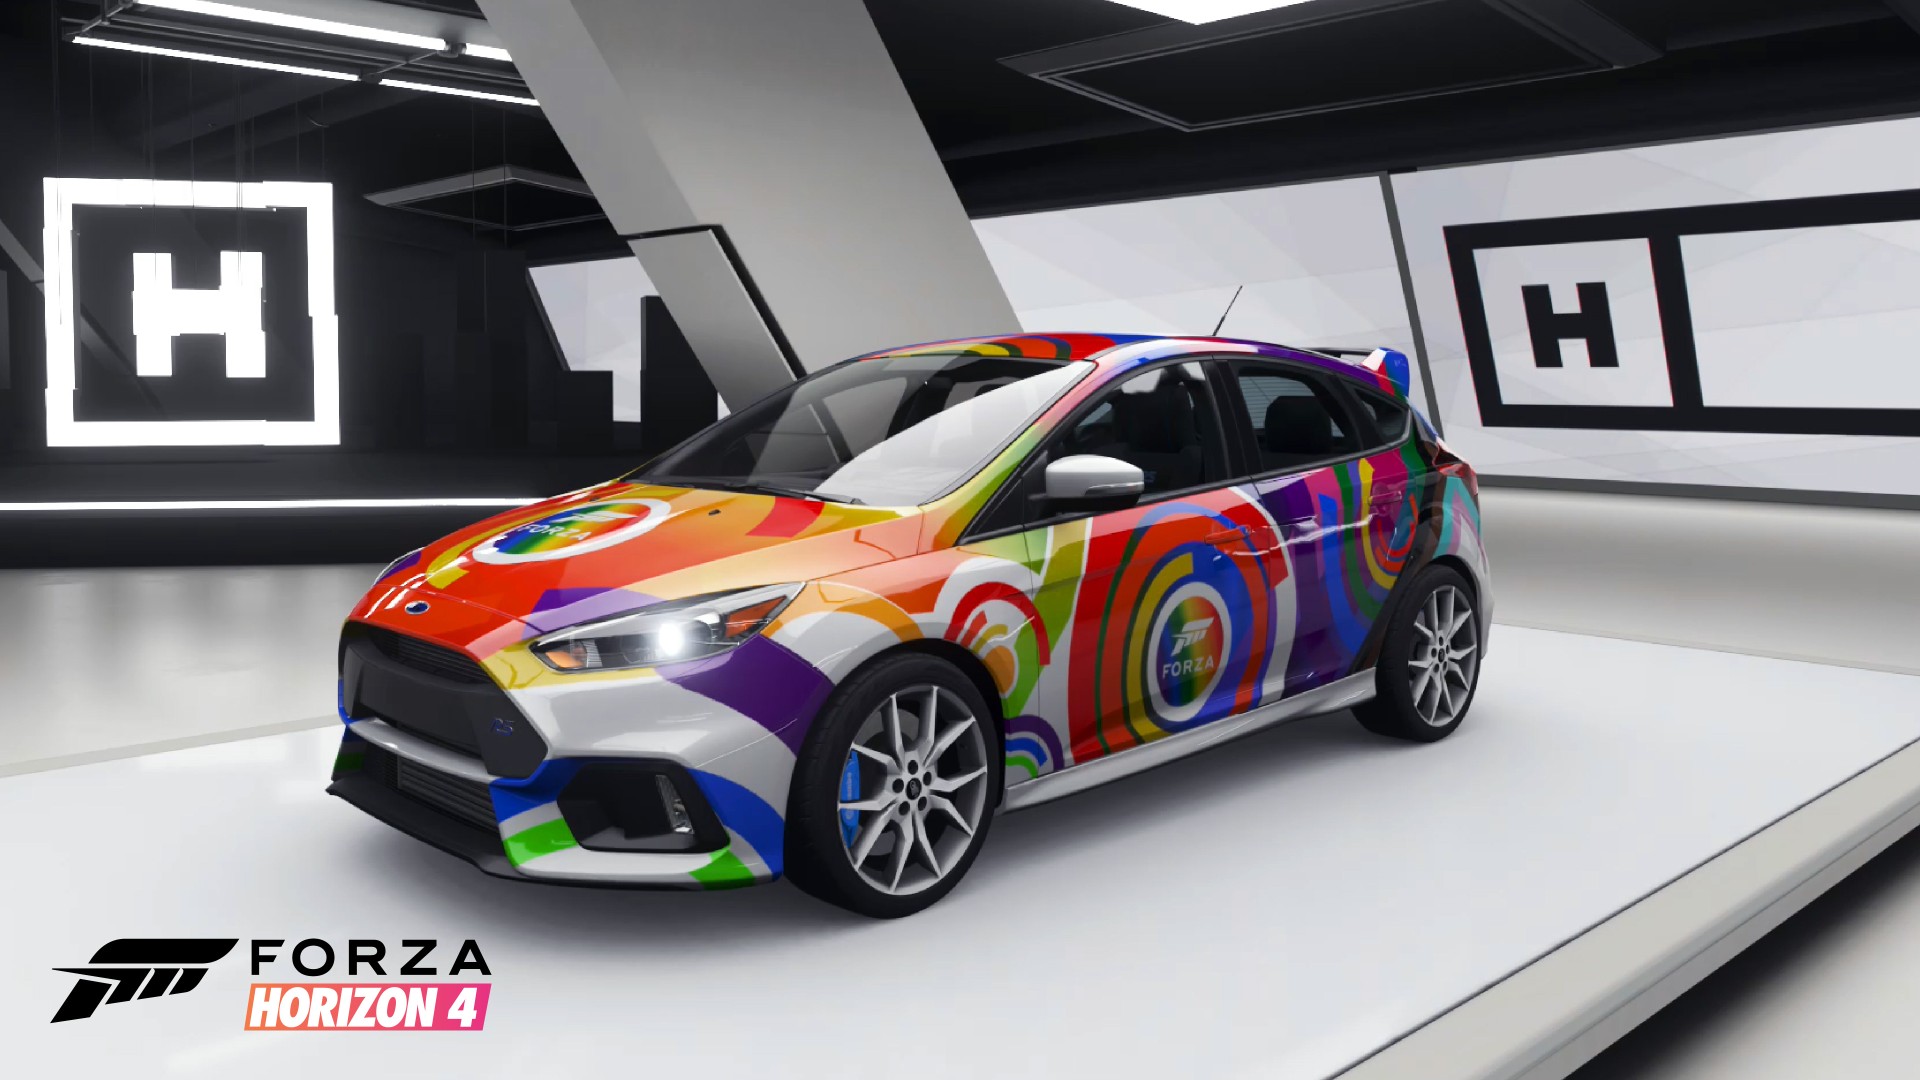 The 2017 Ford Focus RS, decorated with a colorful rainbow circle pattern, is parked at an angle facing the viewer in Forza Horizon 4. xbox